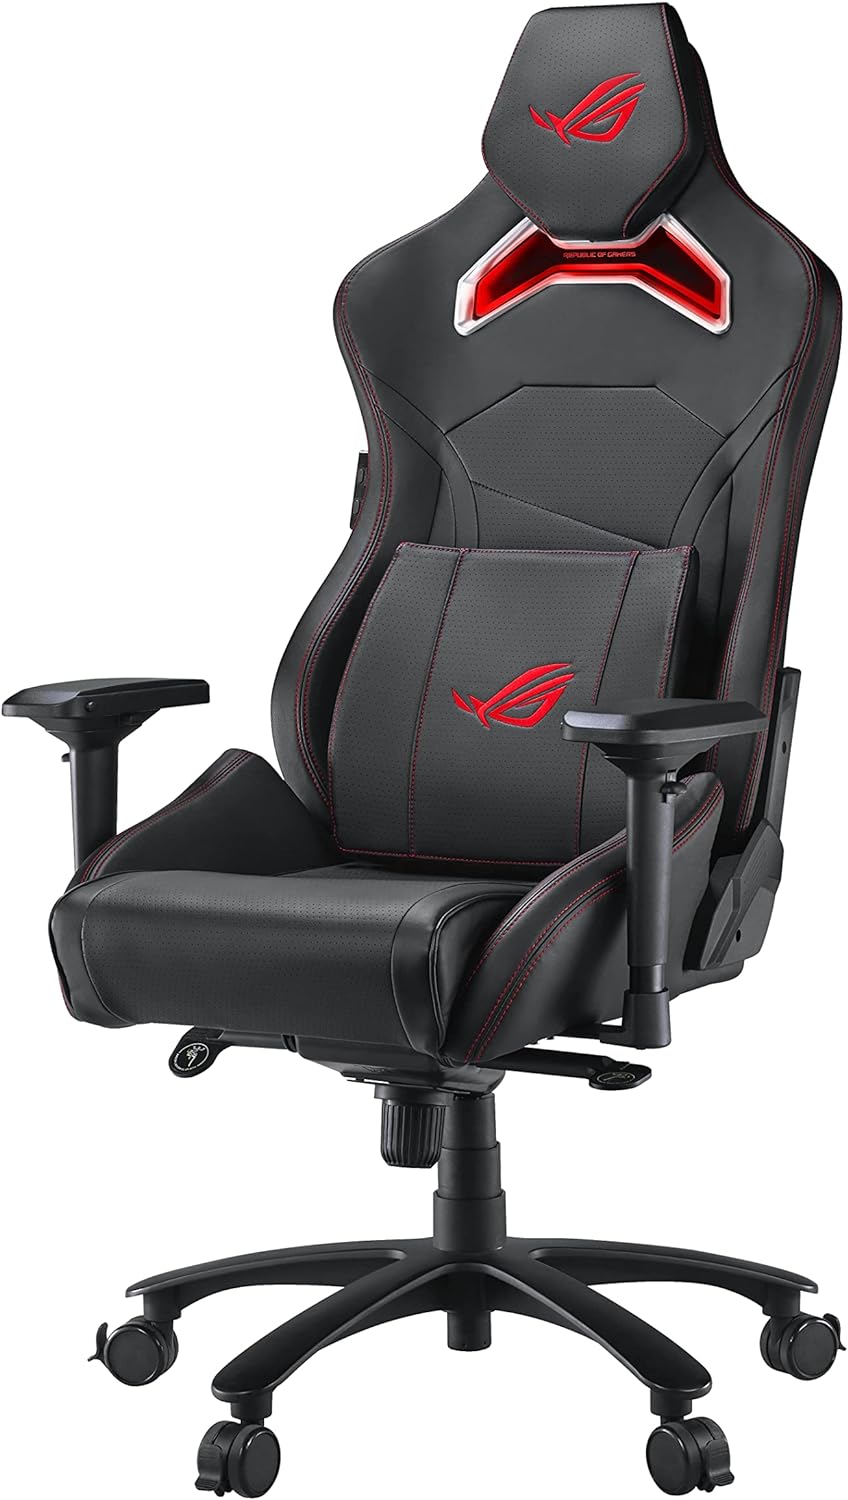 ASUS ROG Chariot Chair - Experience ultimate comfort with high-density foam headrest and memory-foam lumbar cushion. 4718017322782D